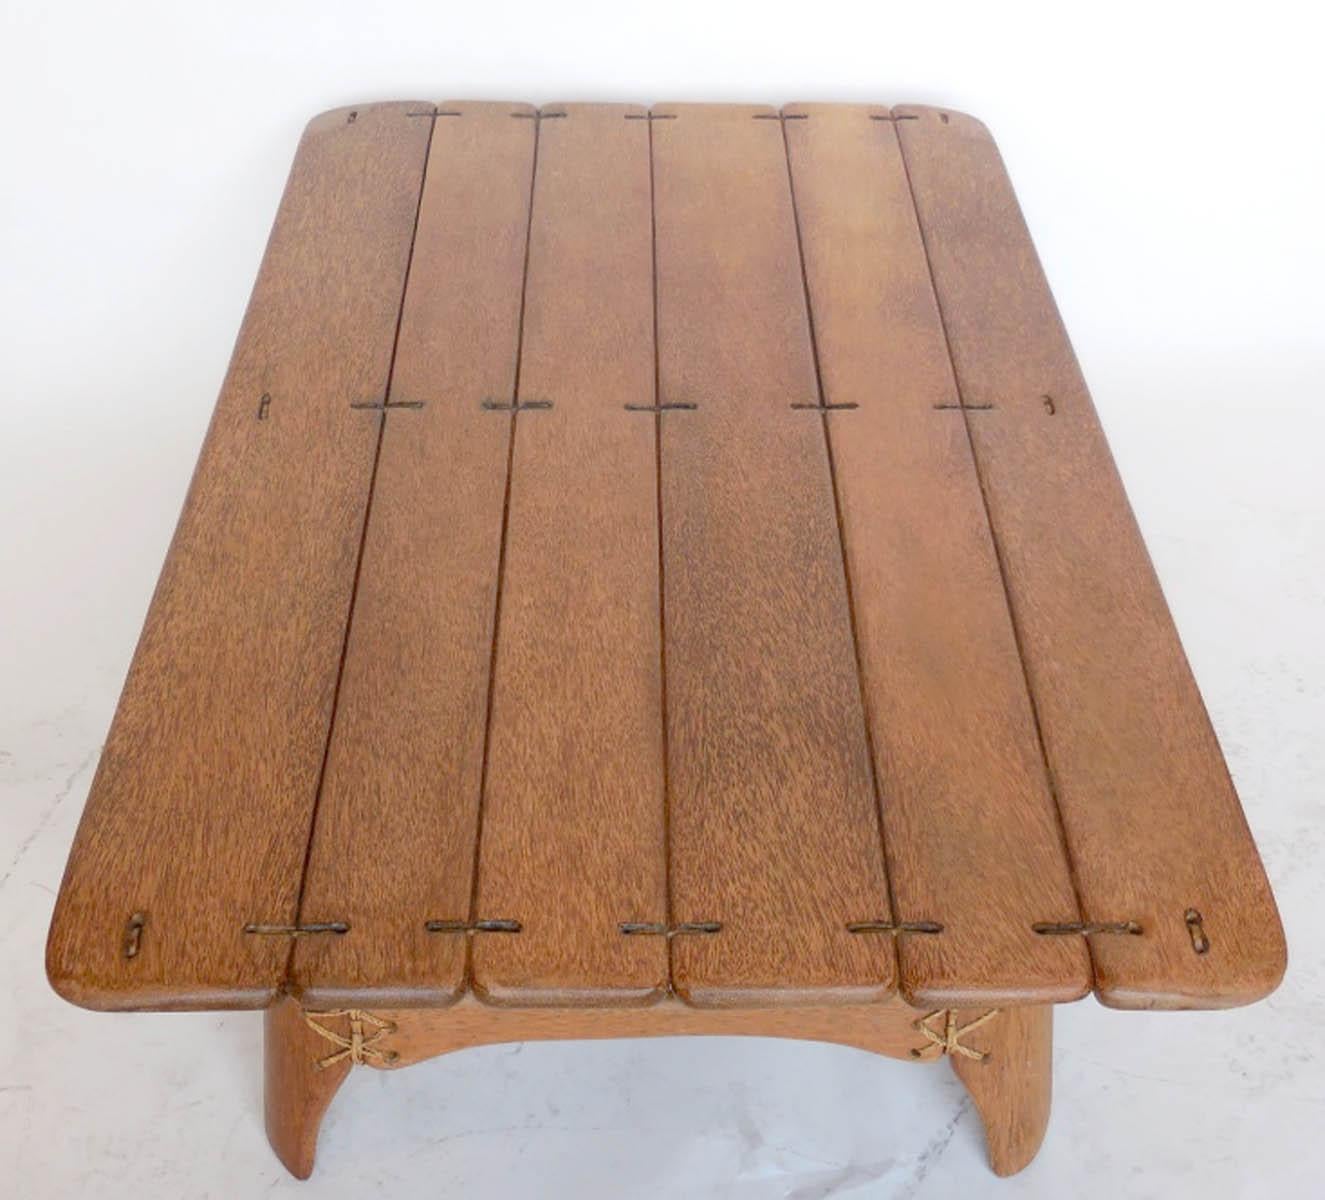 Australian Palm Wood Coffee Table with Rope and Leather Details